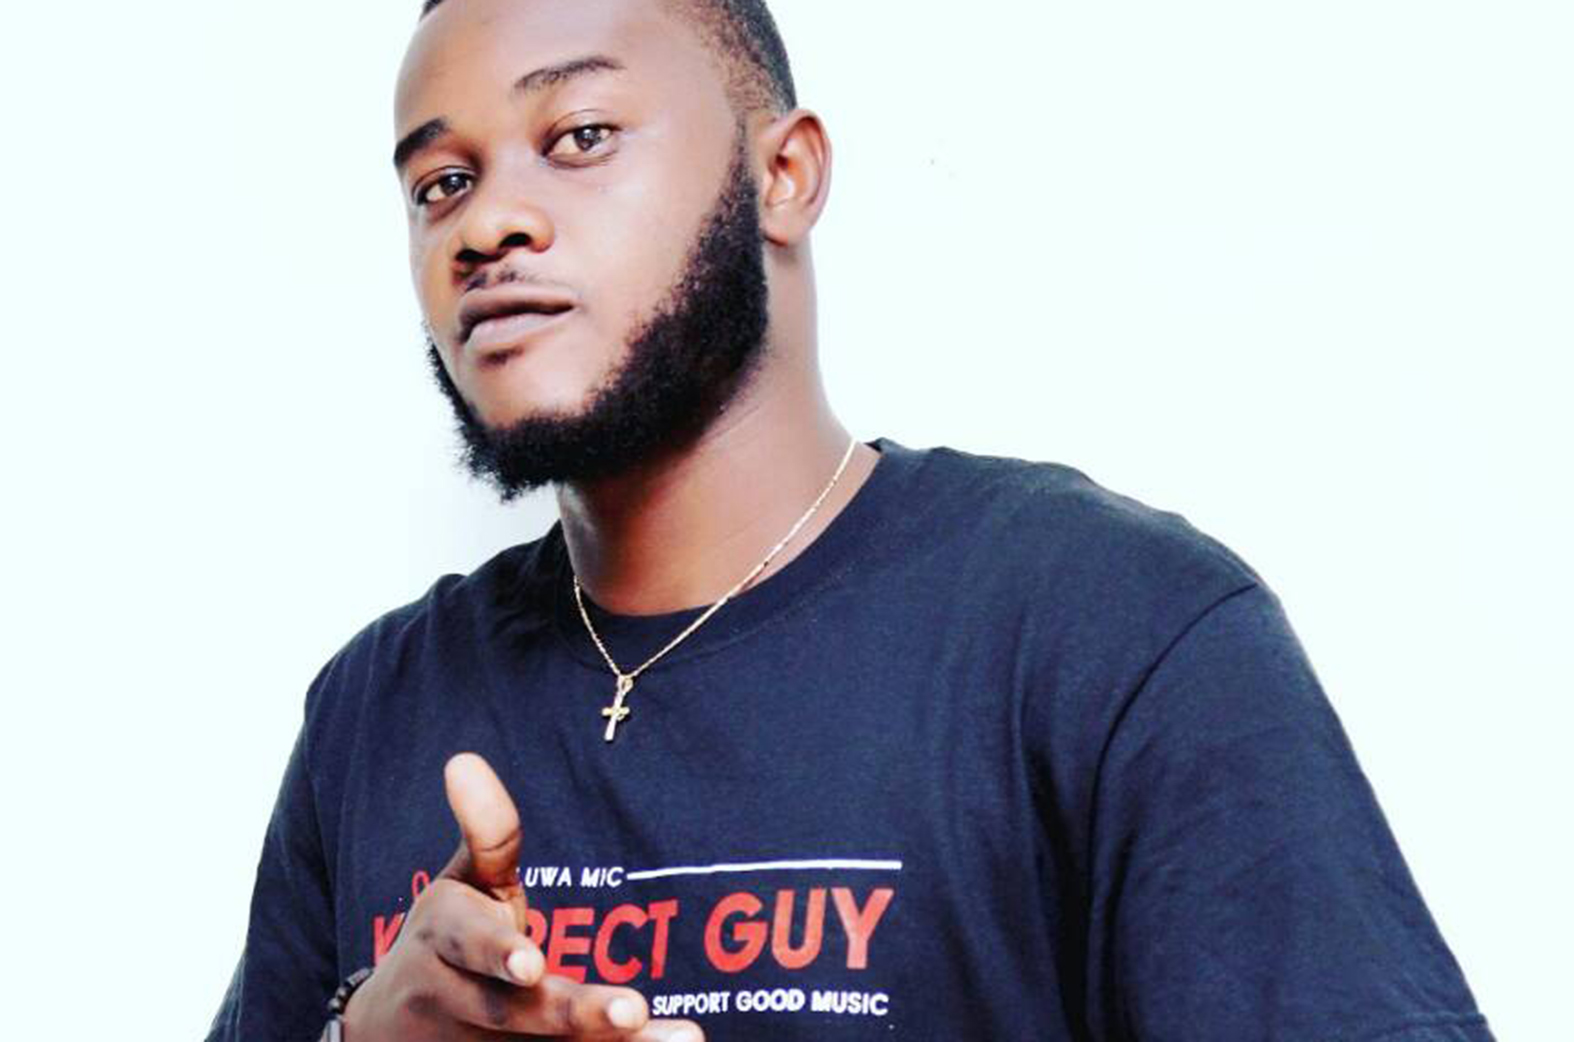 Oluwa Mic says a prayer for his fans